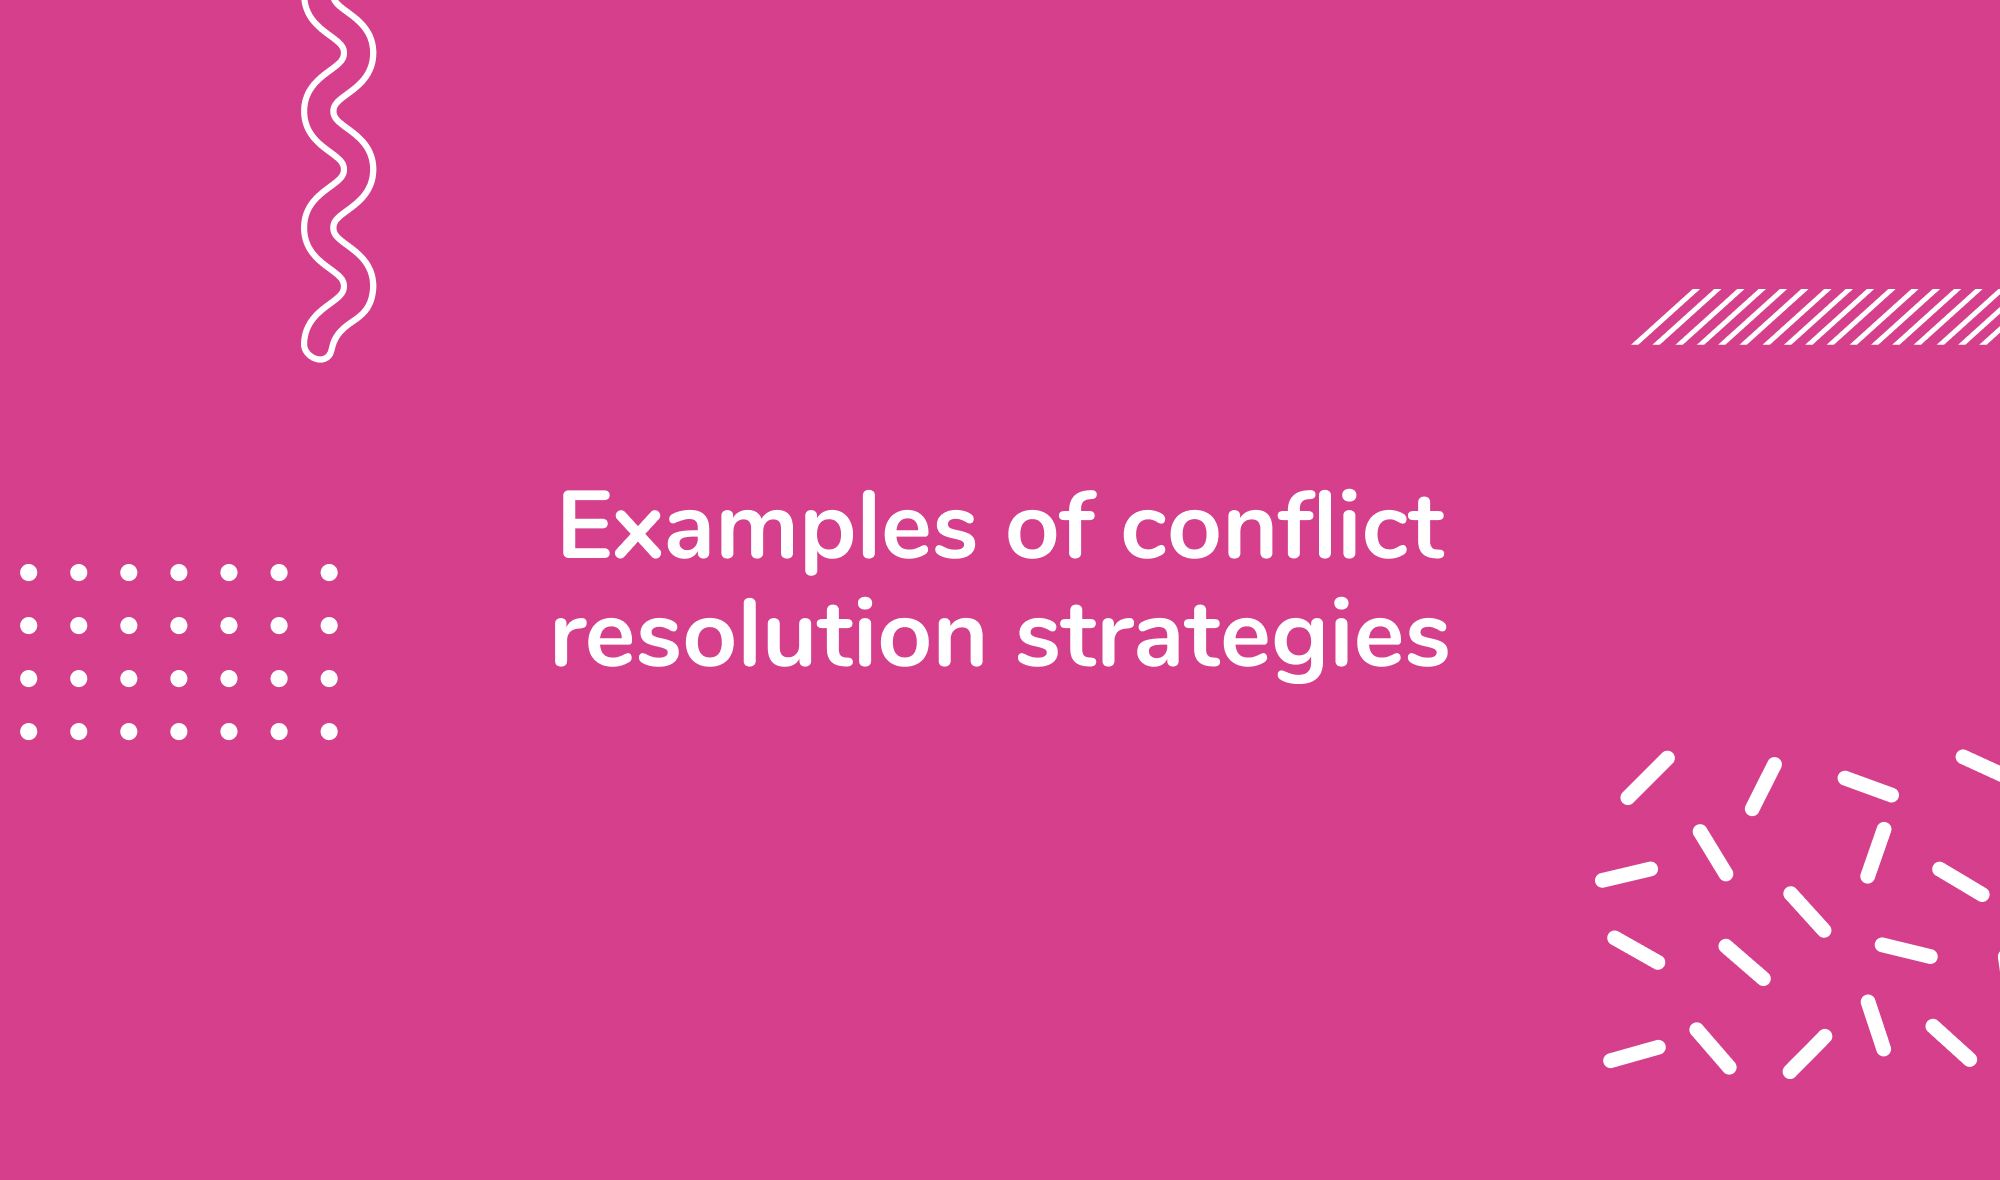 Examples of conflict resolution strategies